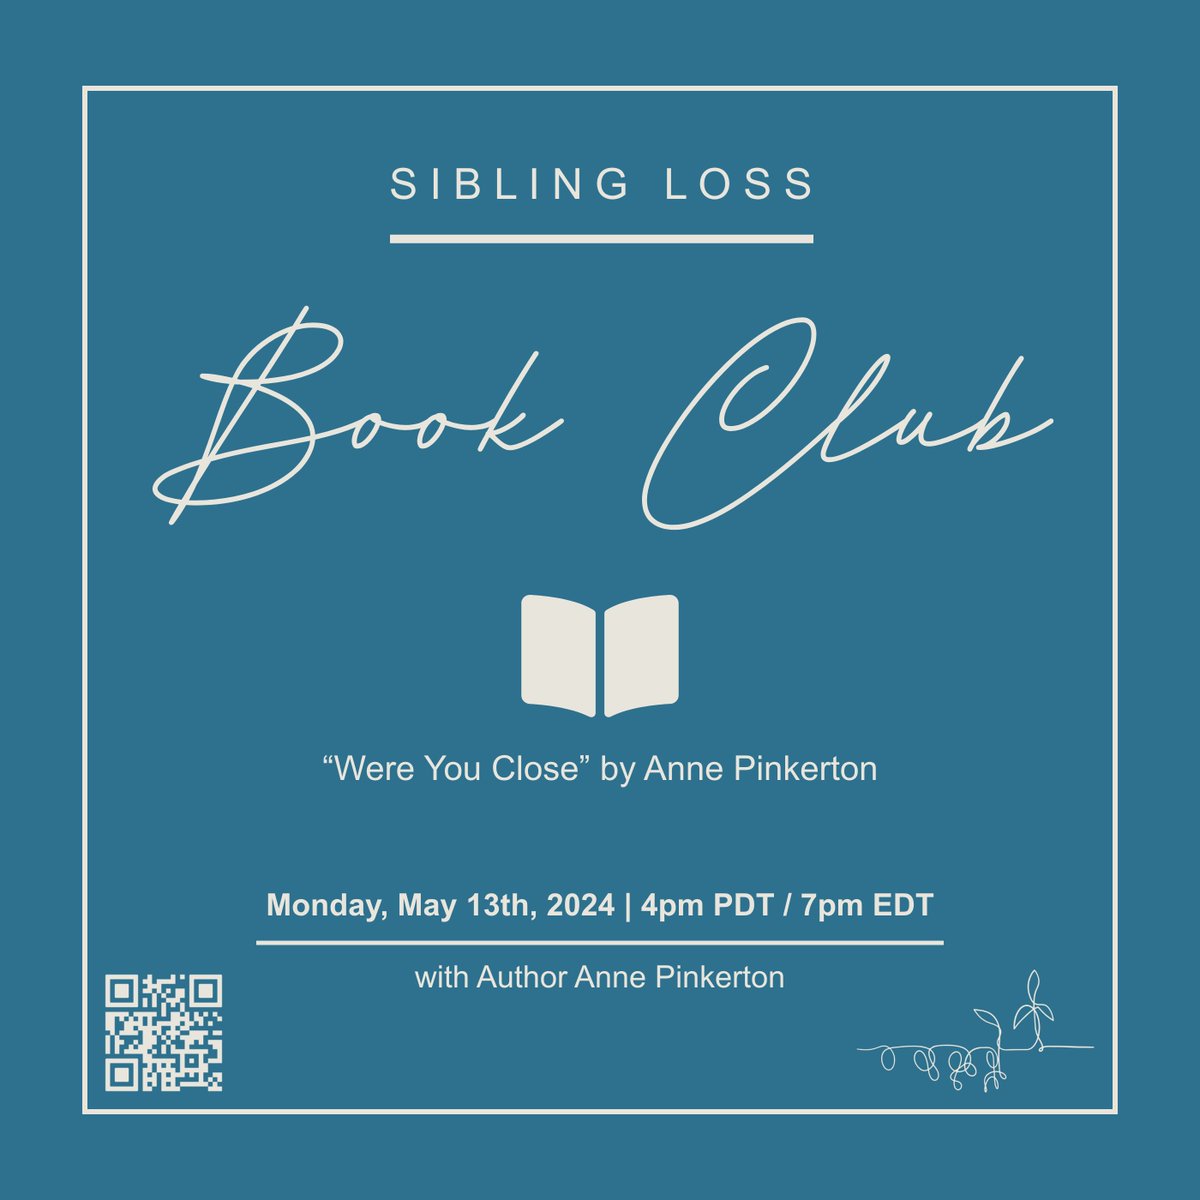 I’m excited to share the first meeting of the Sibling Loss Book Club, sponsored by “The Loss of a Lifetime,” a (soon-to-launch) website and community created by @byalysonshelton , @LightWillFindU and my daughter, Molly Fowkes. To sign up, use the QR code on the graphic below.